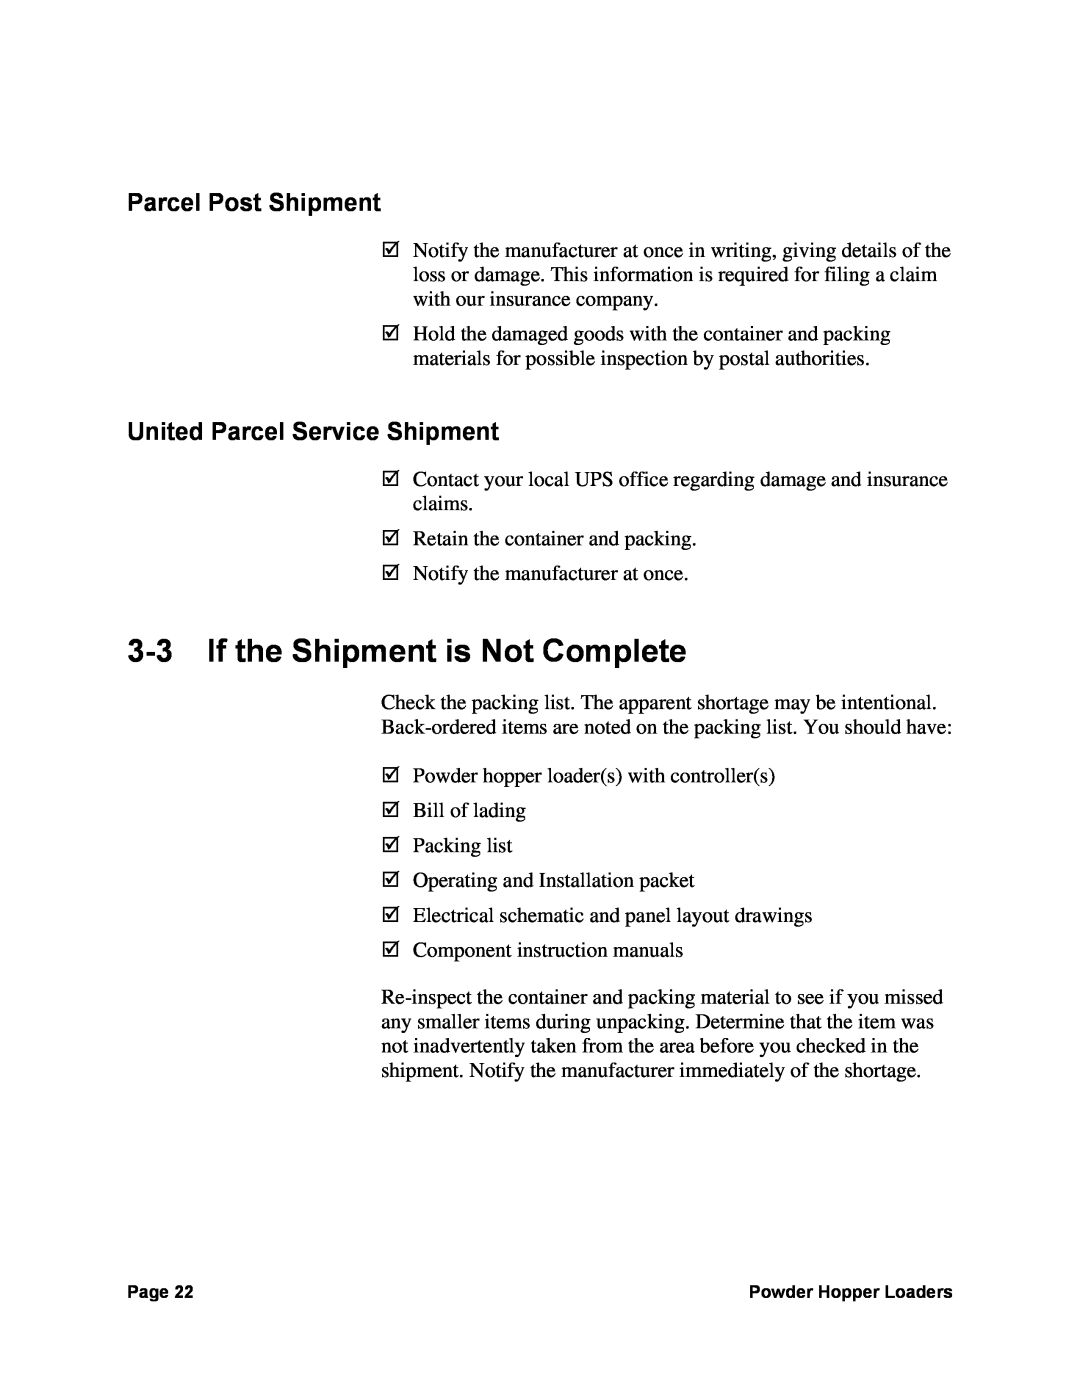 Sterling 0, 882, 238 manual If the Shipment is Not Complete, Parcel Post Shipment, United Parcel Service Shipment 